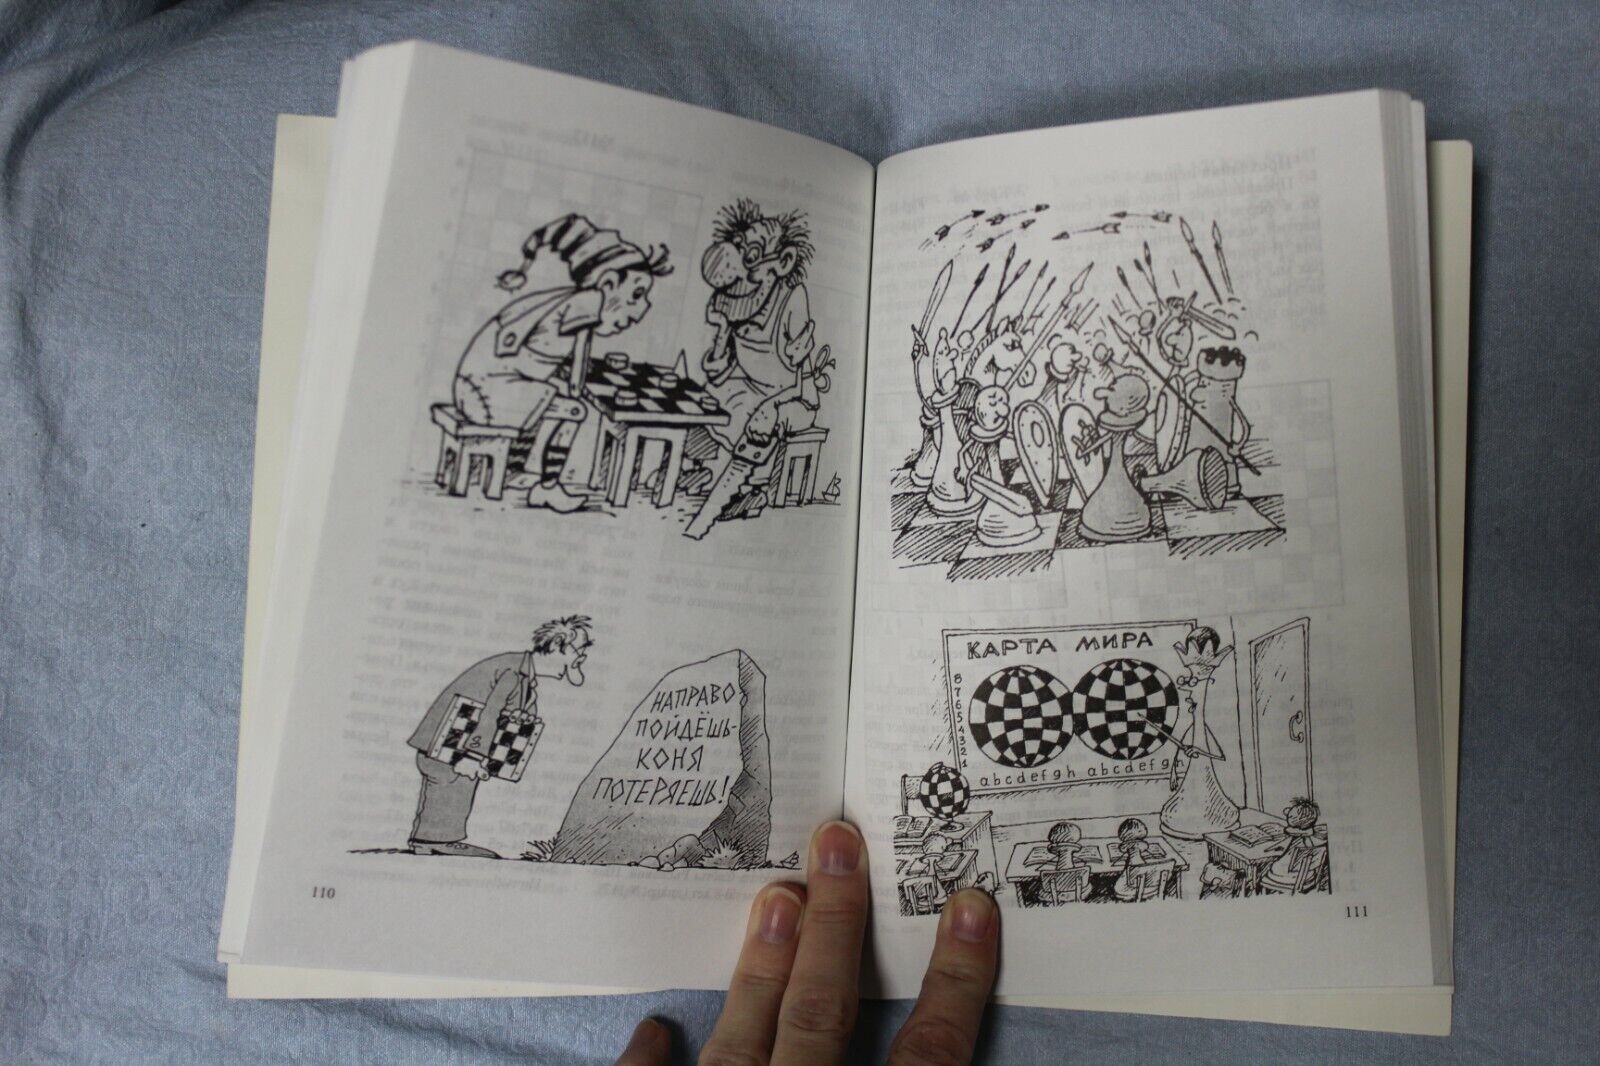 11061.Chess book: Chess for the Little Ones w illustrations, Kogan. Kaluga 2008